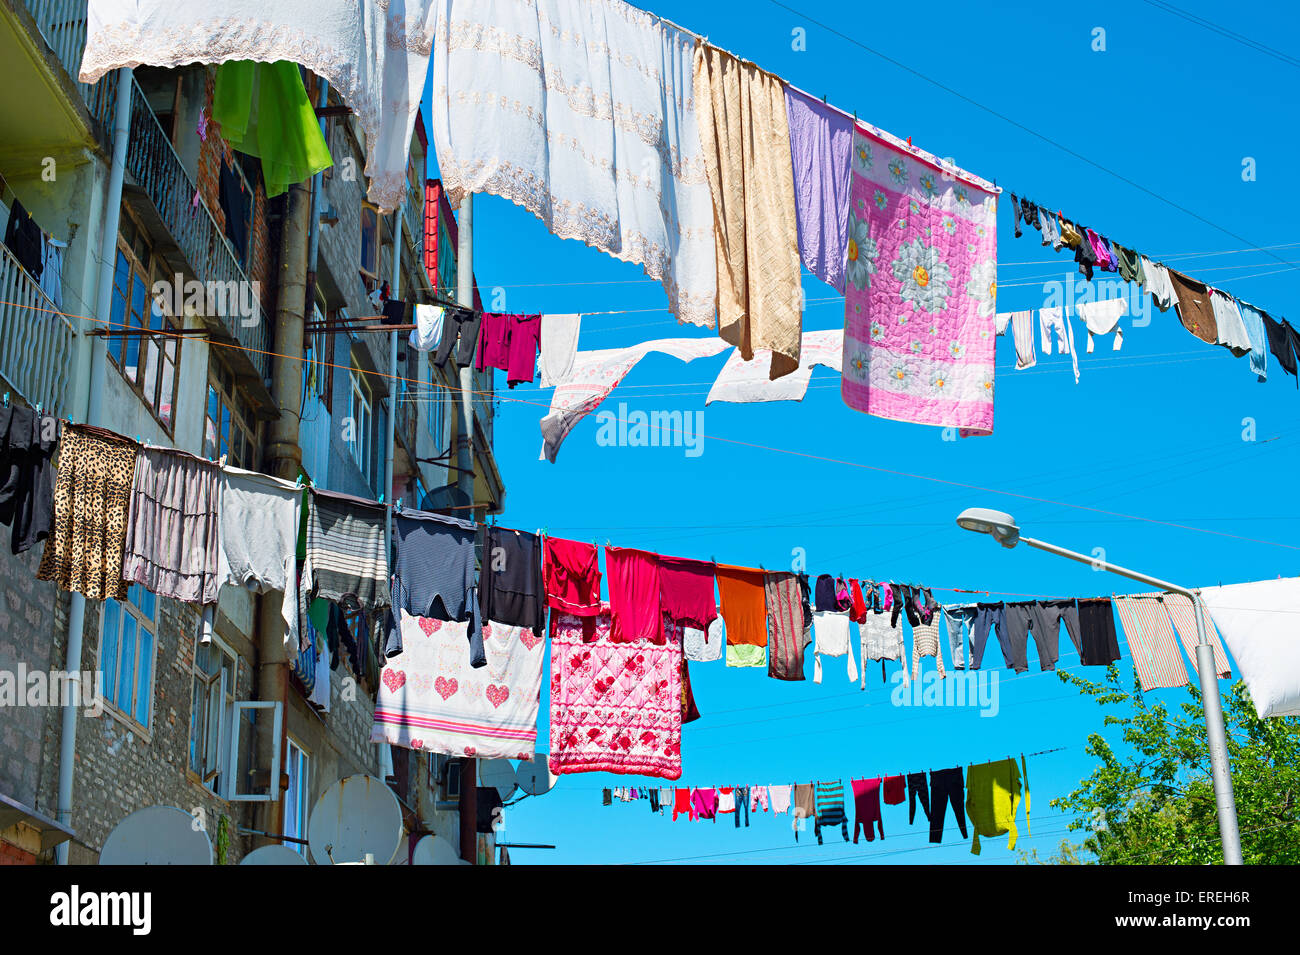 Clothes drying in traditional way on the street of Batumi, Georgia Stock Photo